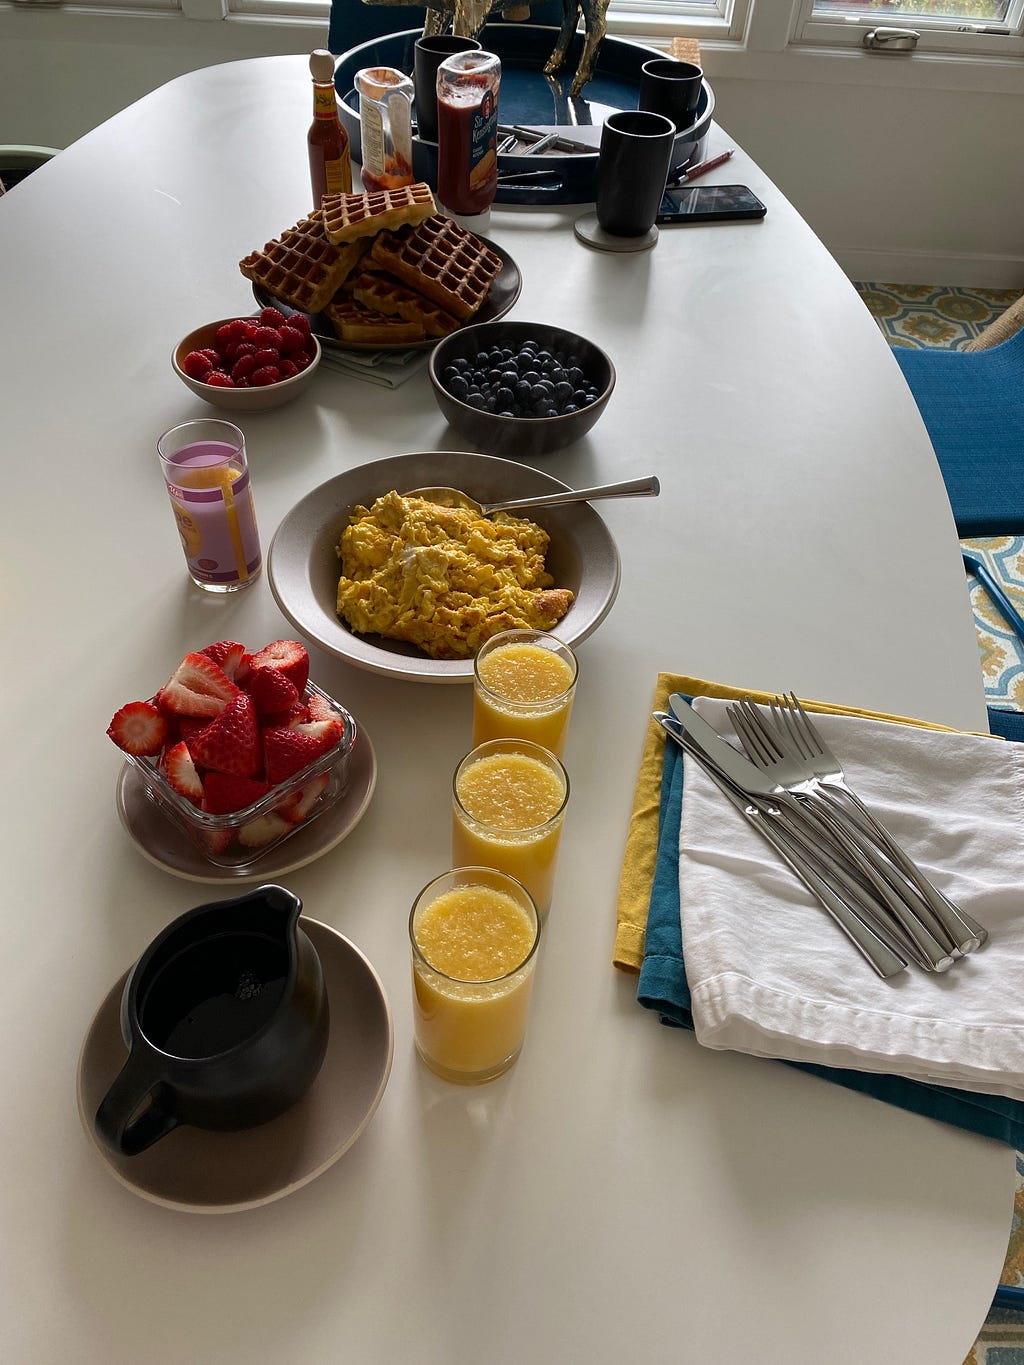 A sumptuous “insourced” brunch in a home dining area with fresh berries, scrambled eggs, homemade waffles and glasses of orange juice on a white table.